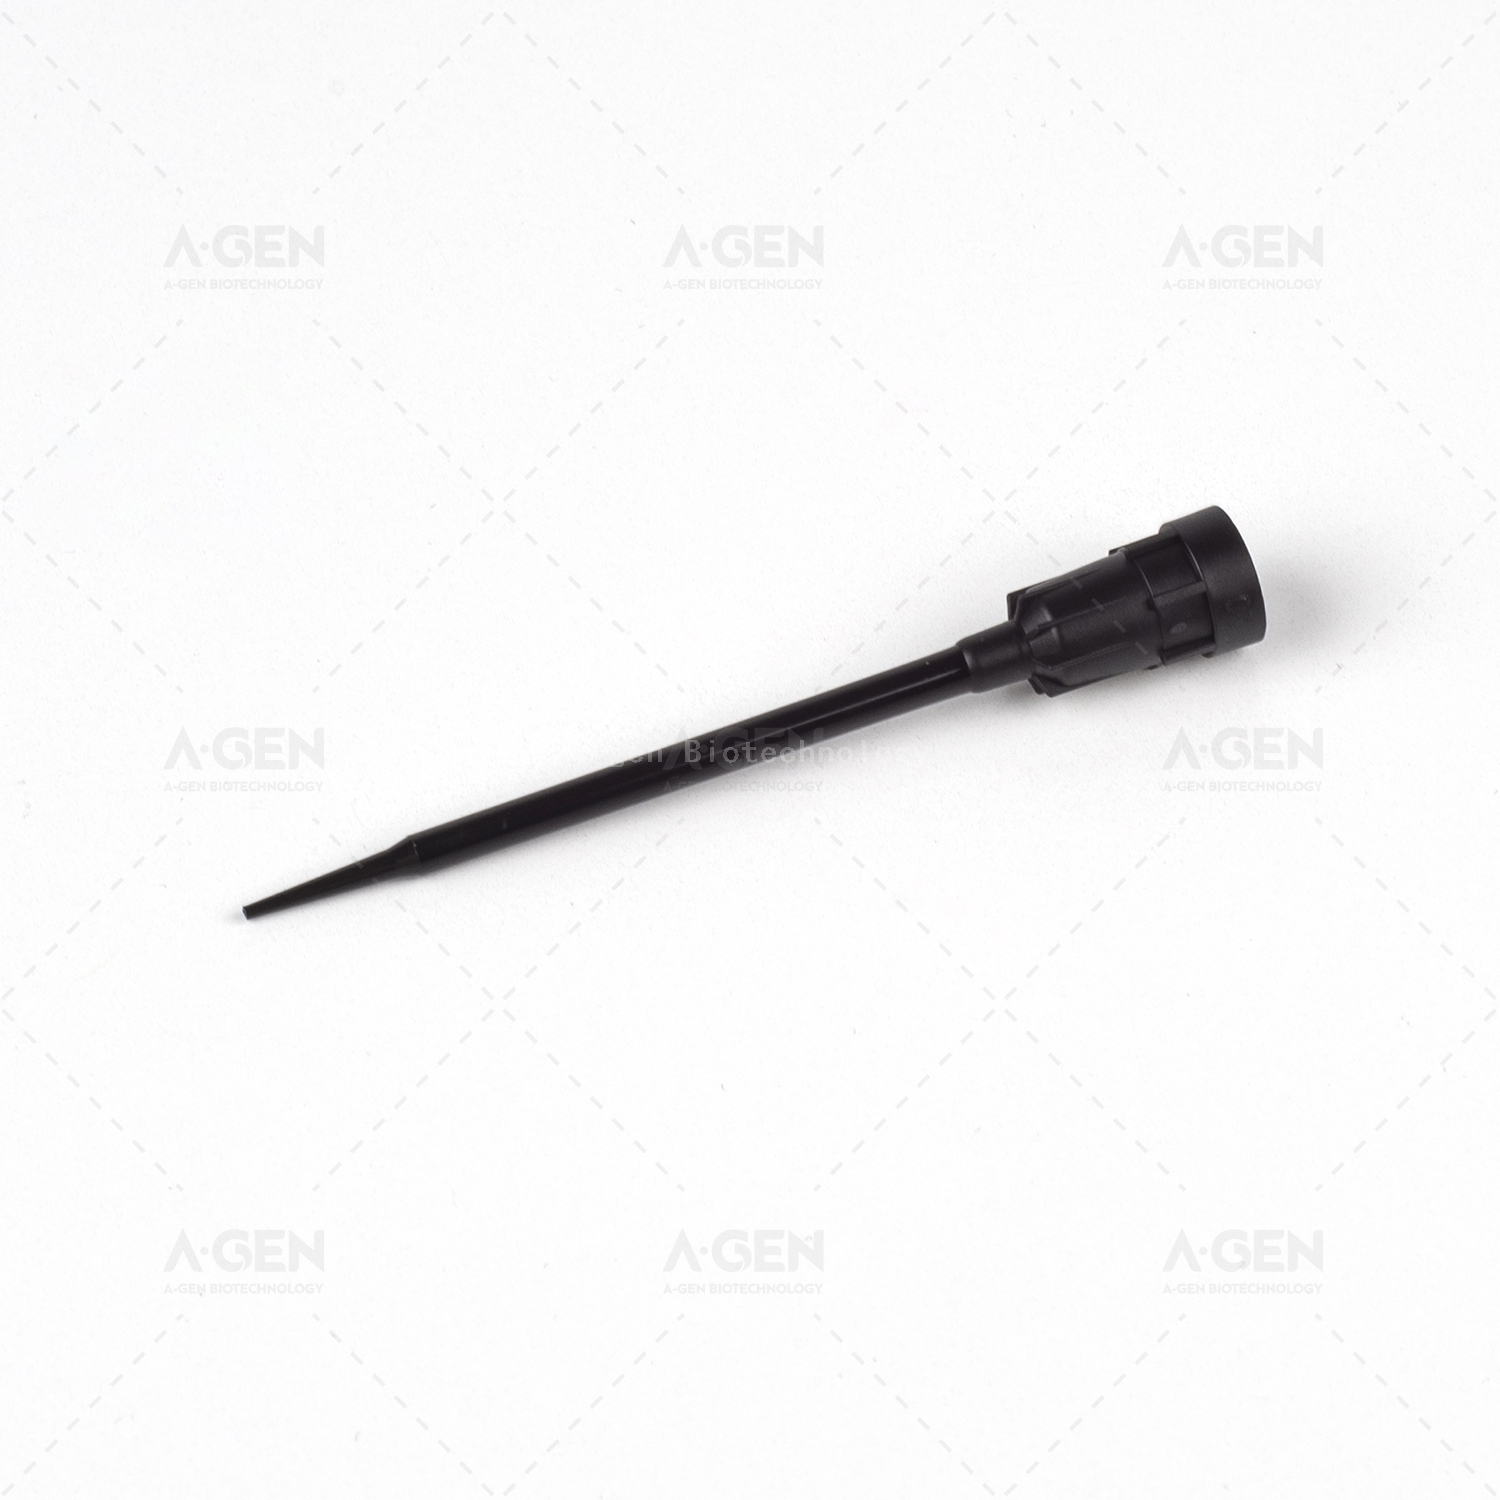 Tecan LiHa Conductive 50μL PP Pipette Tip (Racked,sterilized) TTF-50C-RSL Low Retention for Liquid Handling with filter